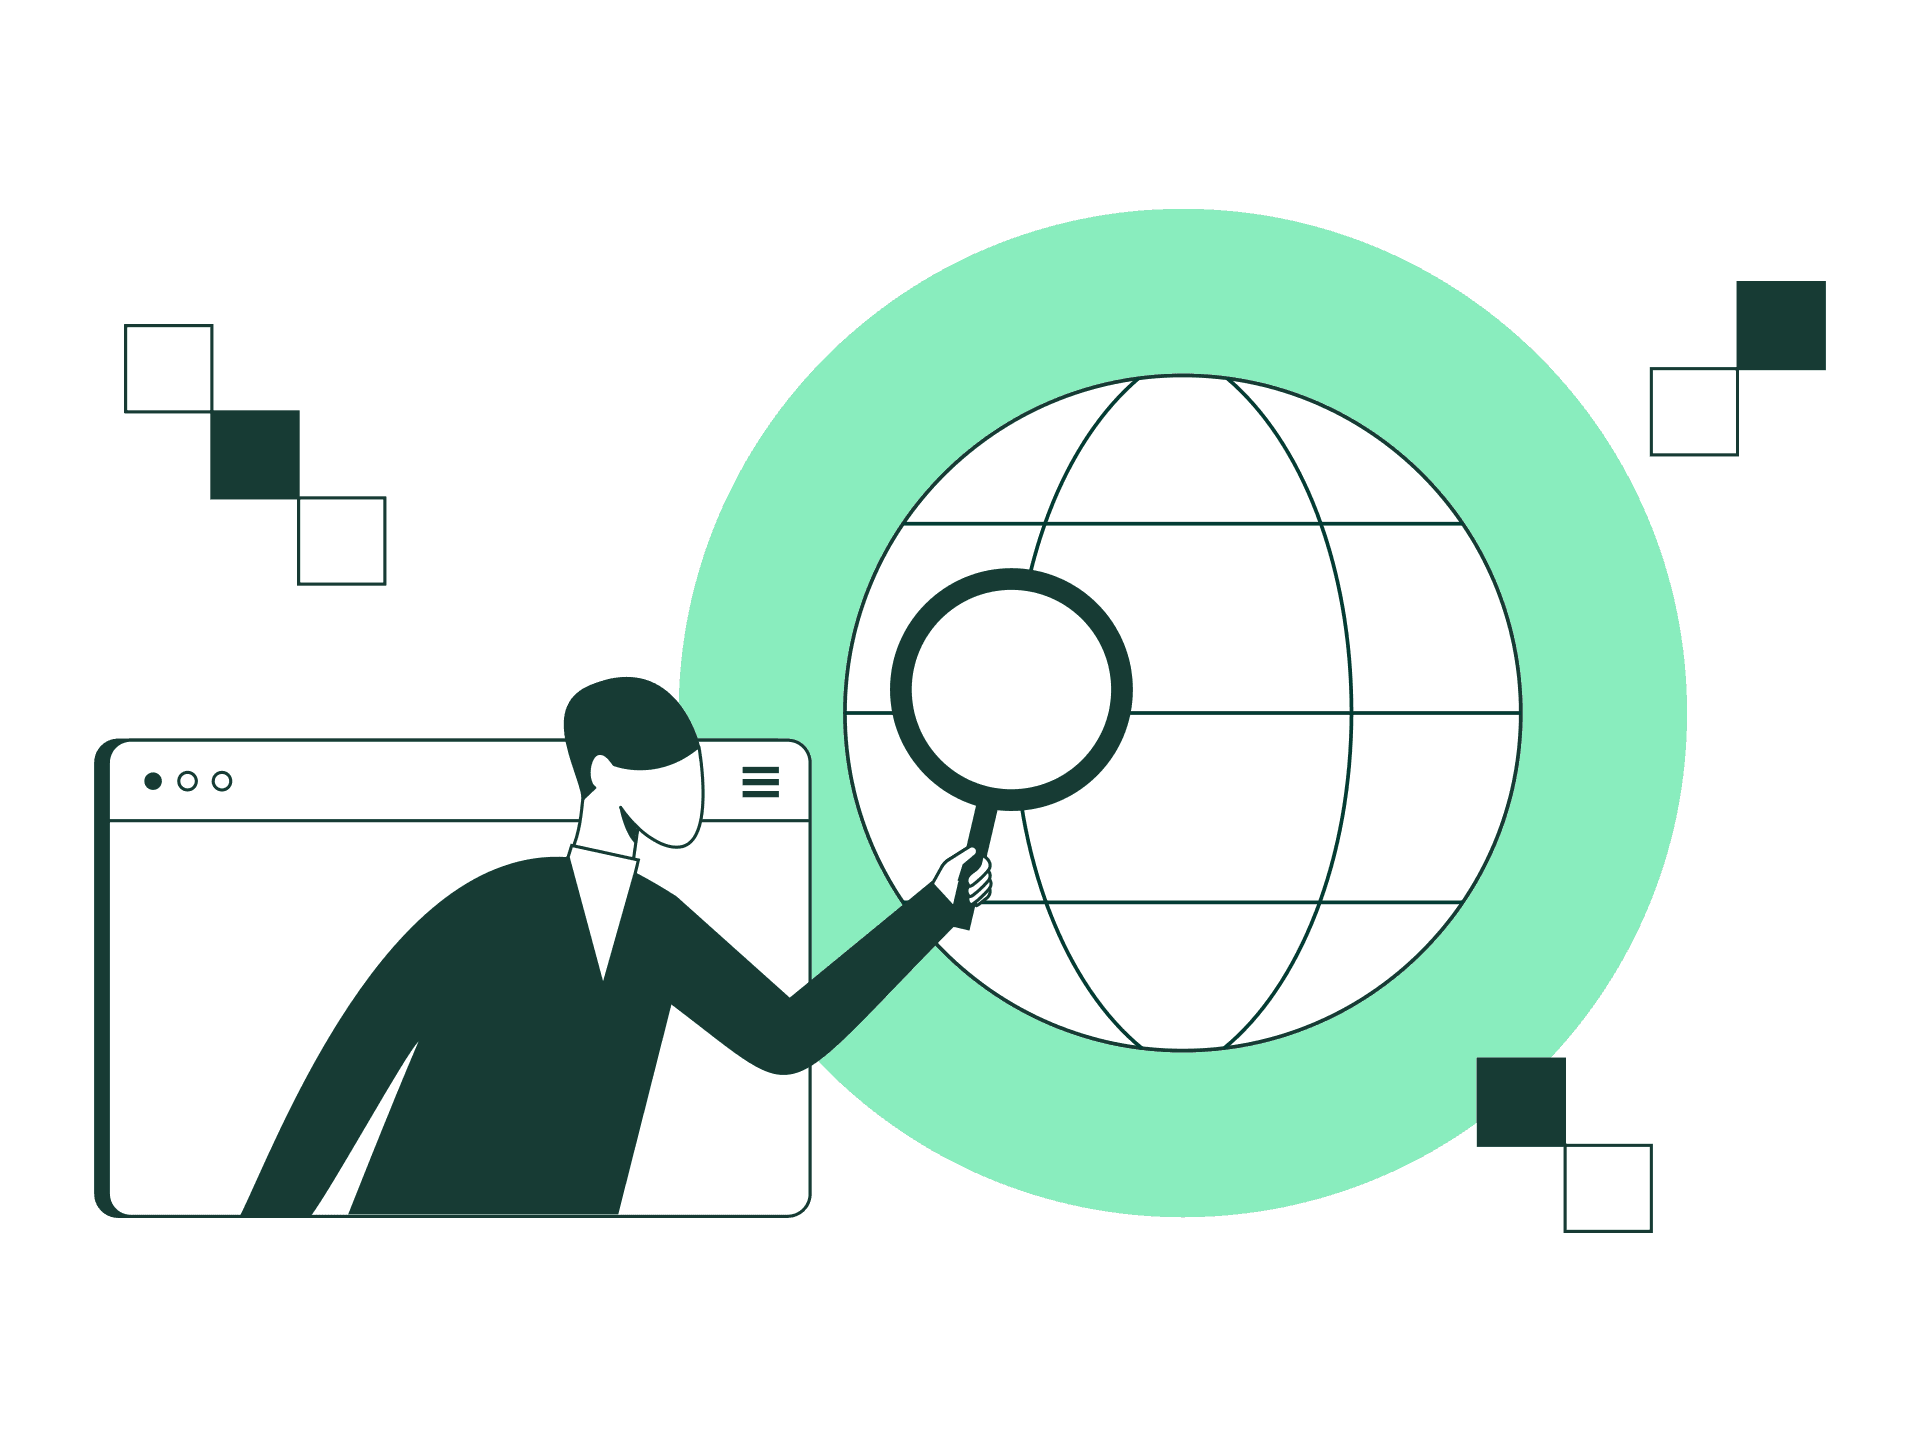 Illustration of a person with a magnifier glass hovering over planet earth